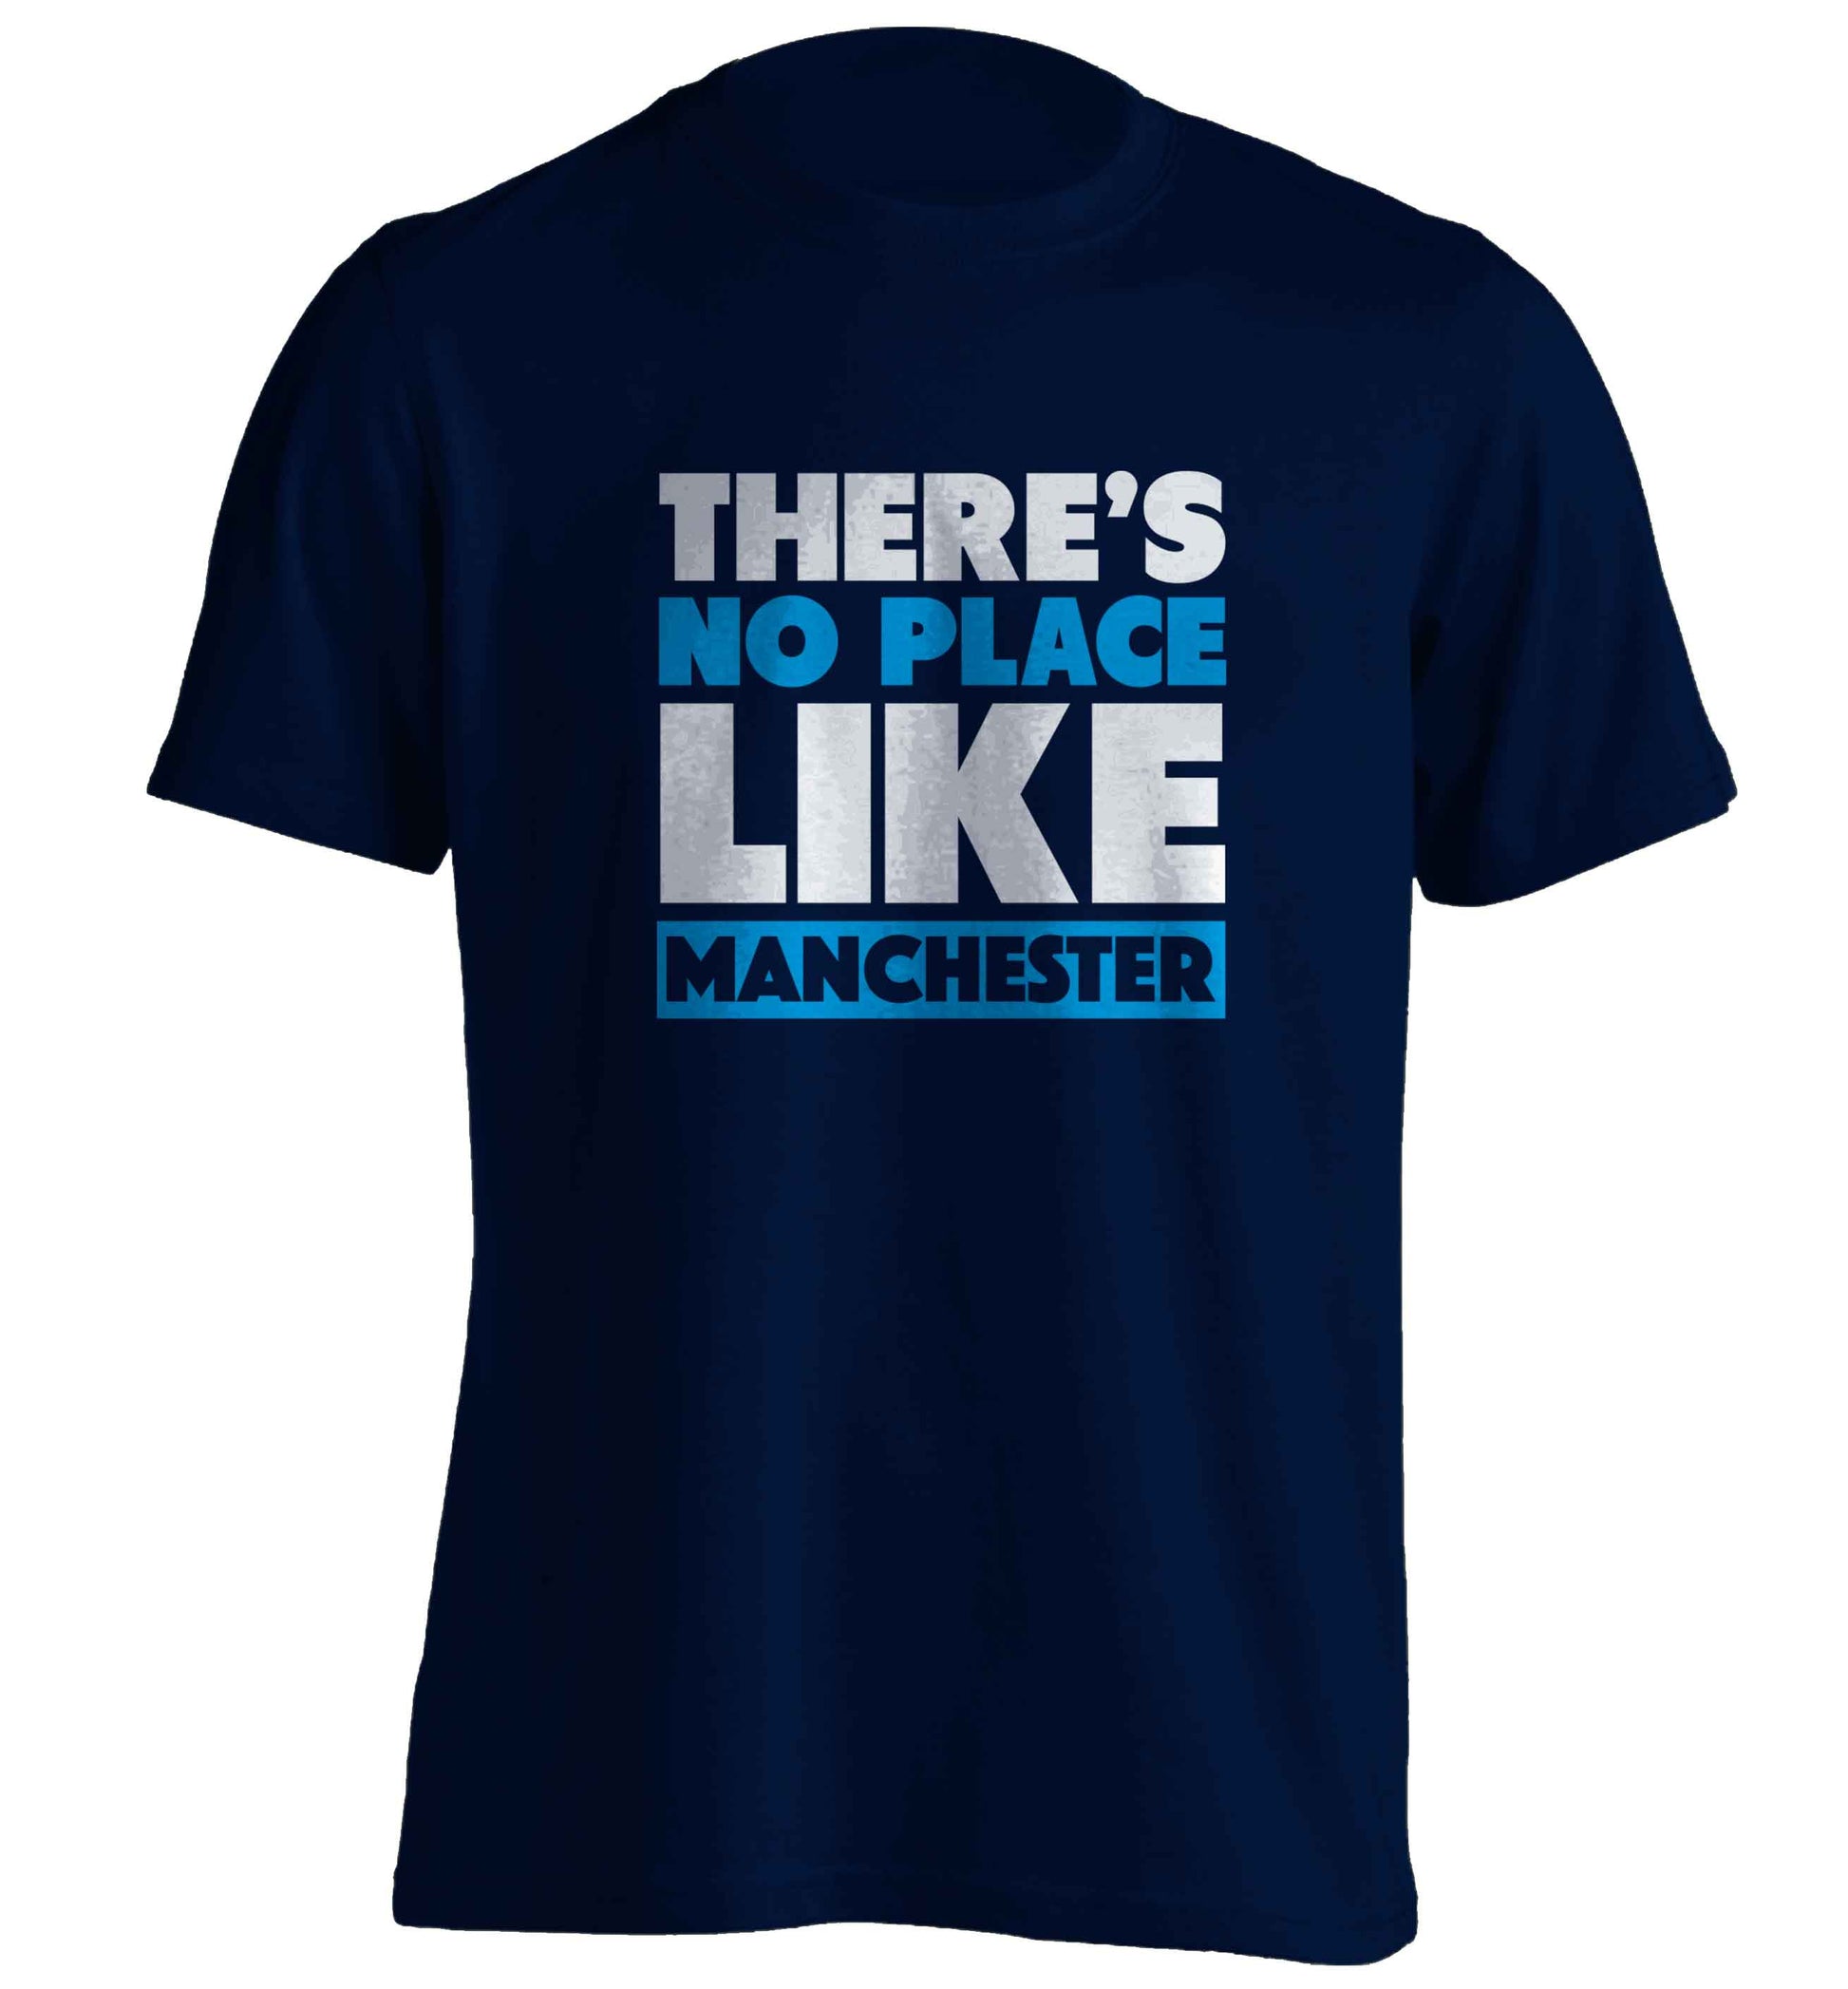 There's no place like Manchester adults unisex navy Tshirt 2XL